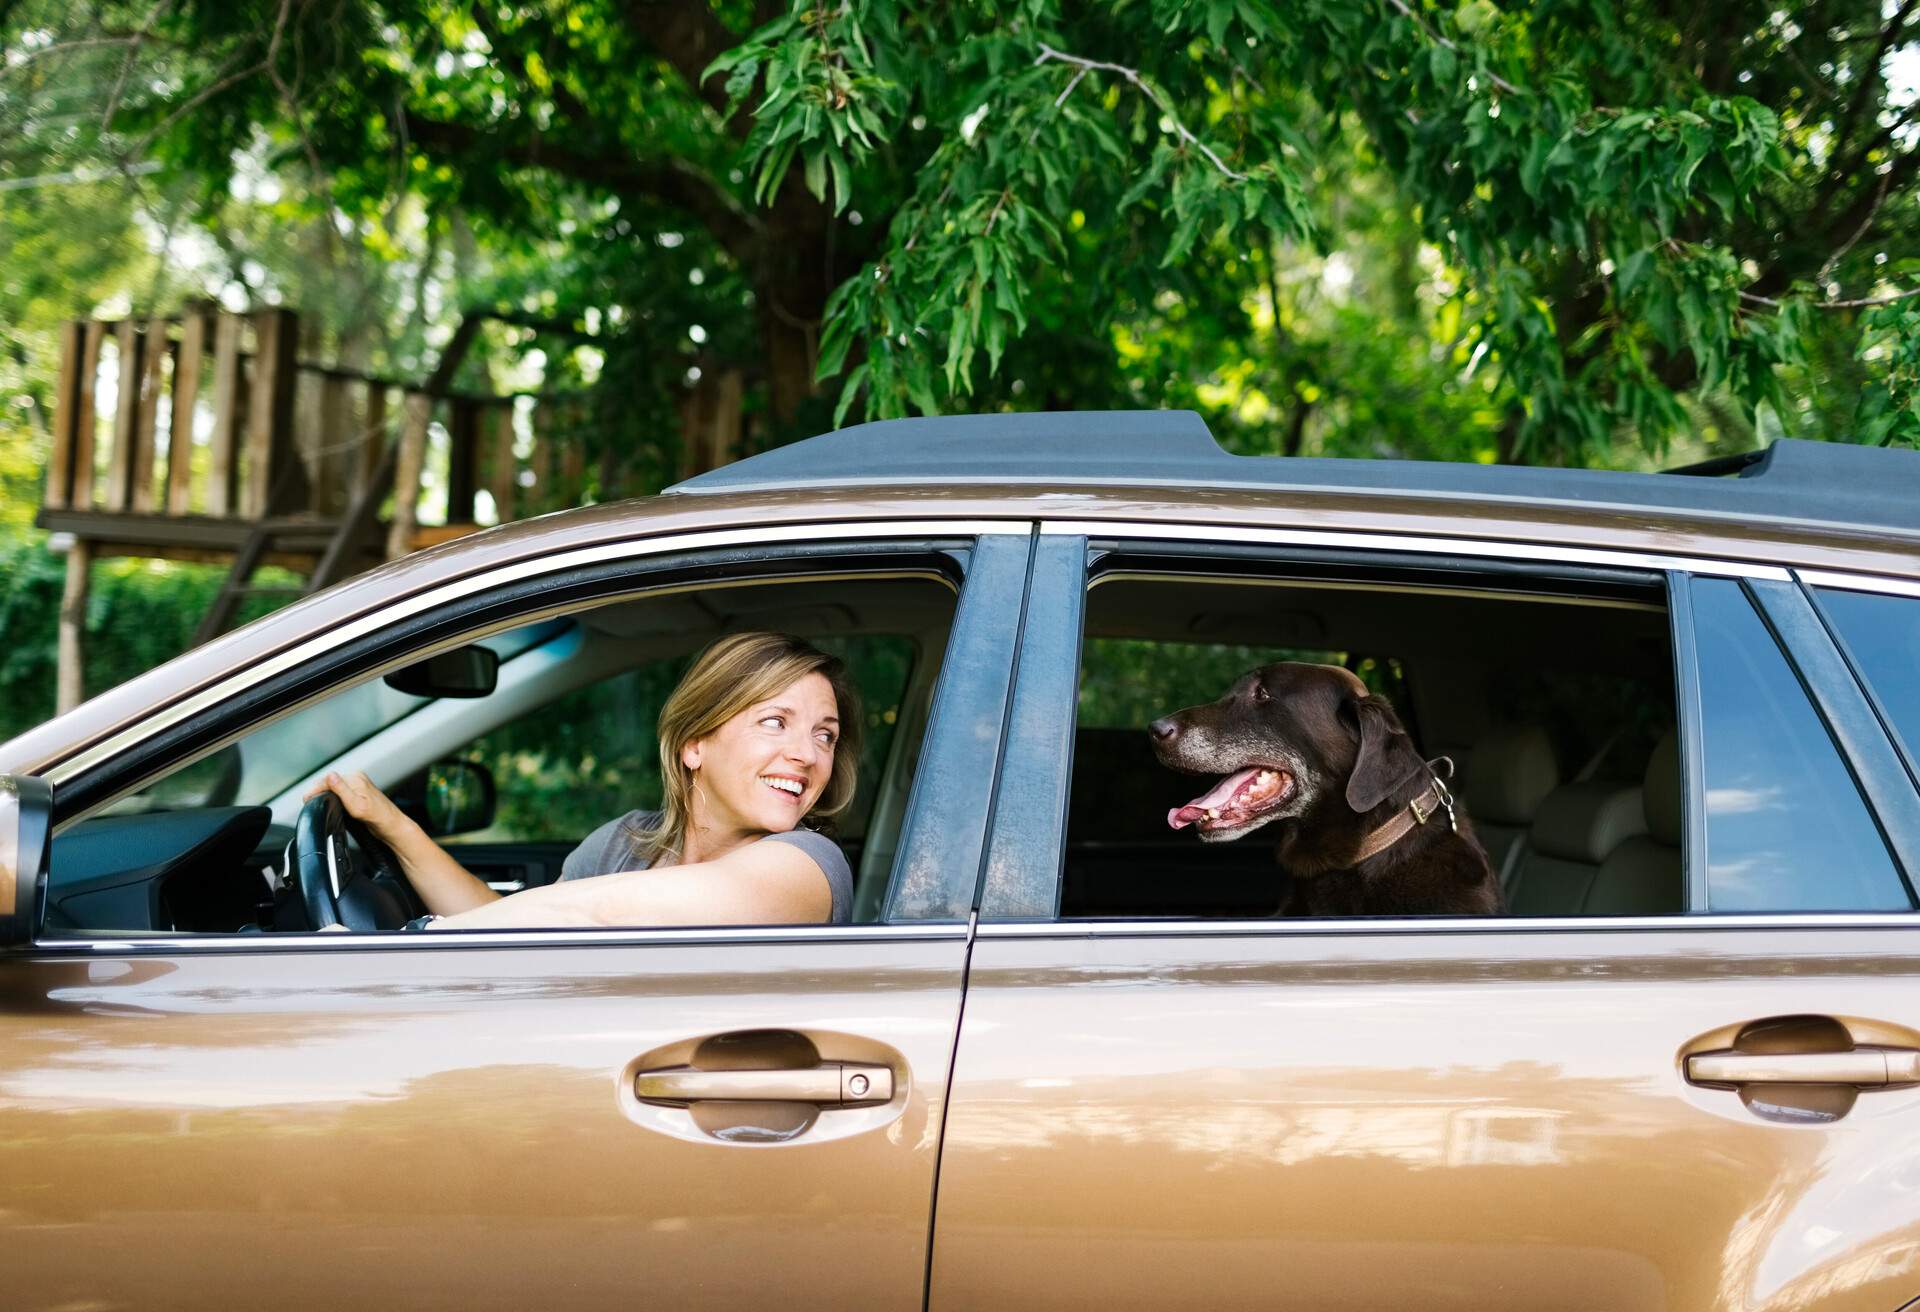 THEME_ANIMAL_DOG_CAR_PEOPLE_WOMAN_GettyImages